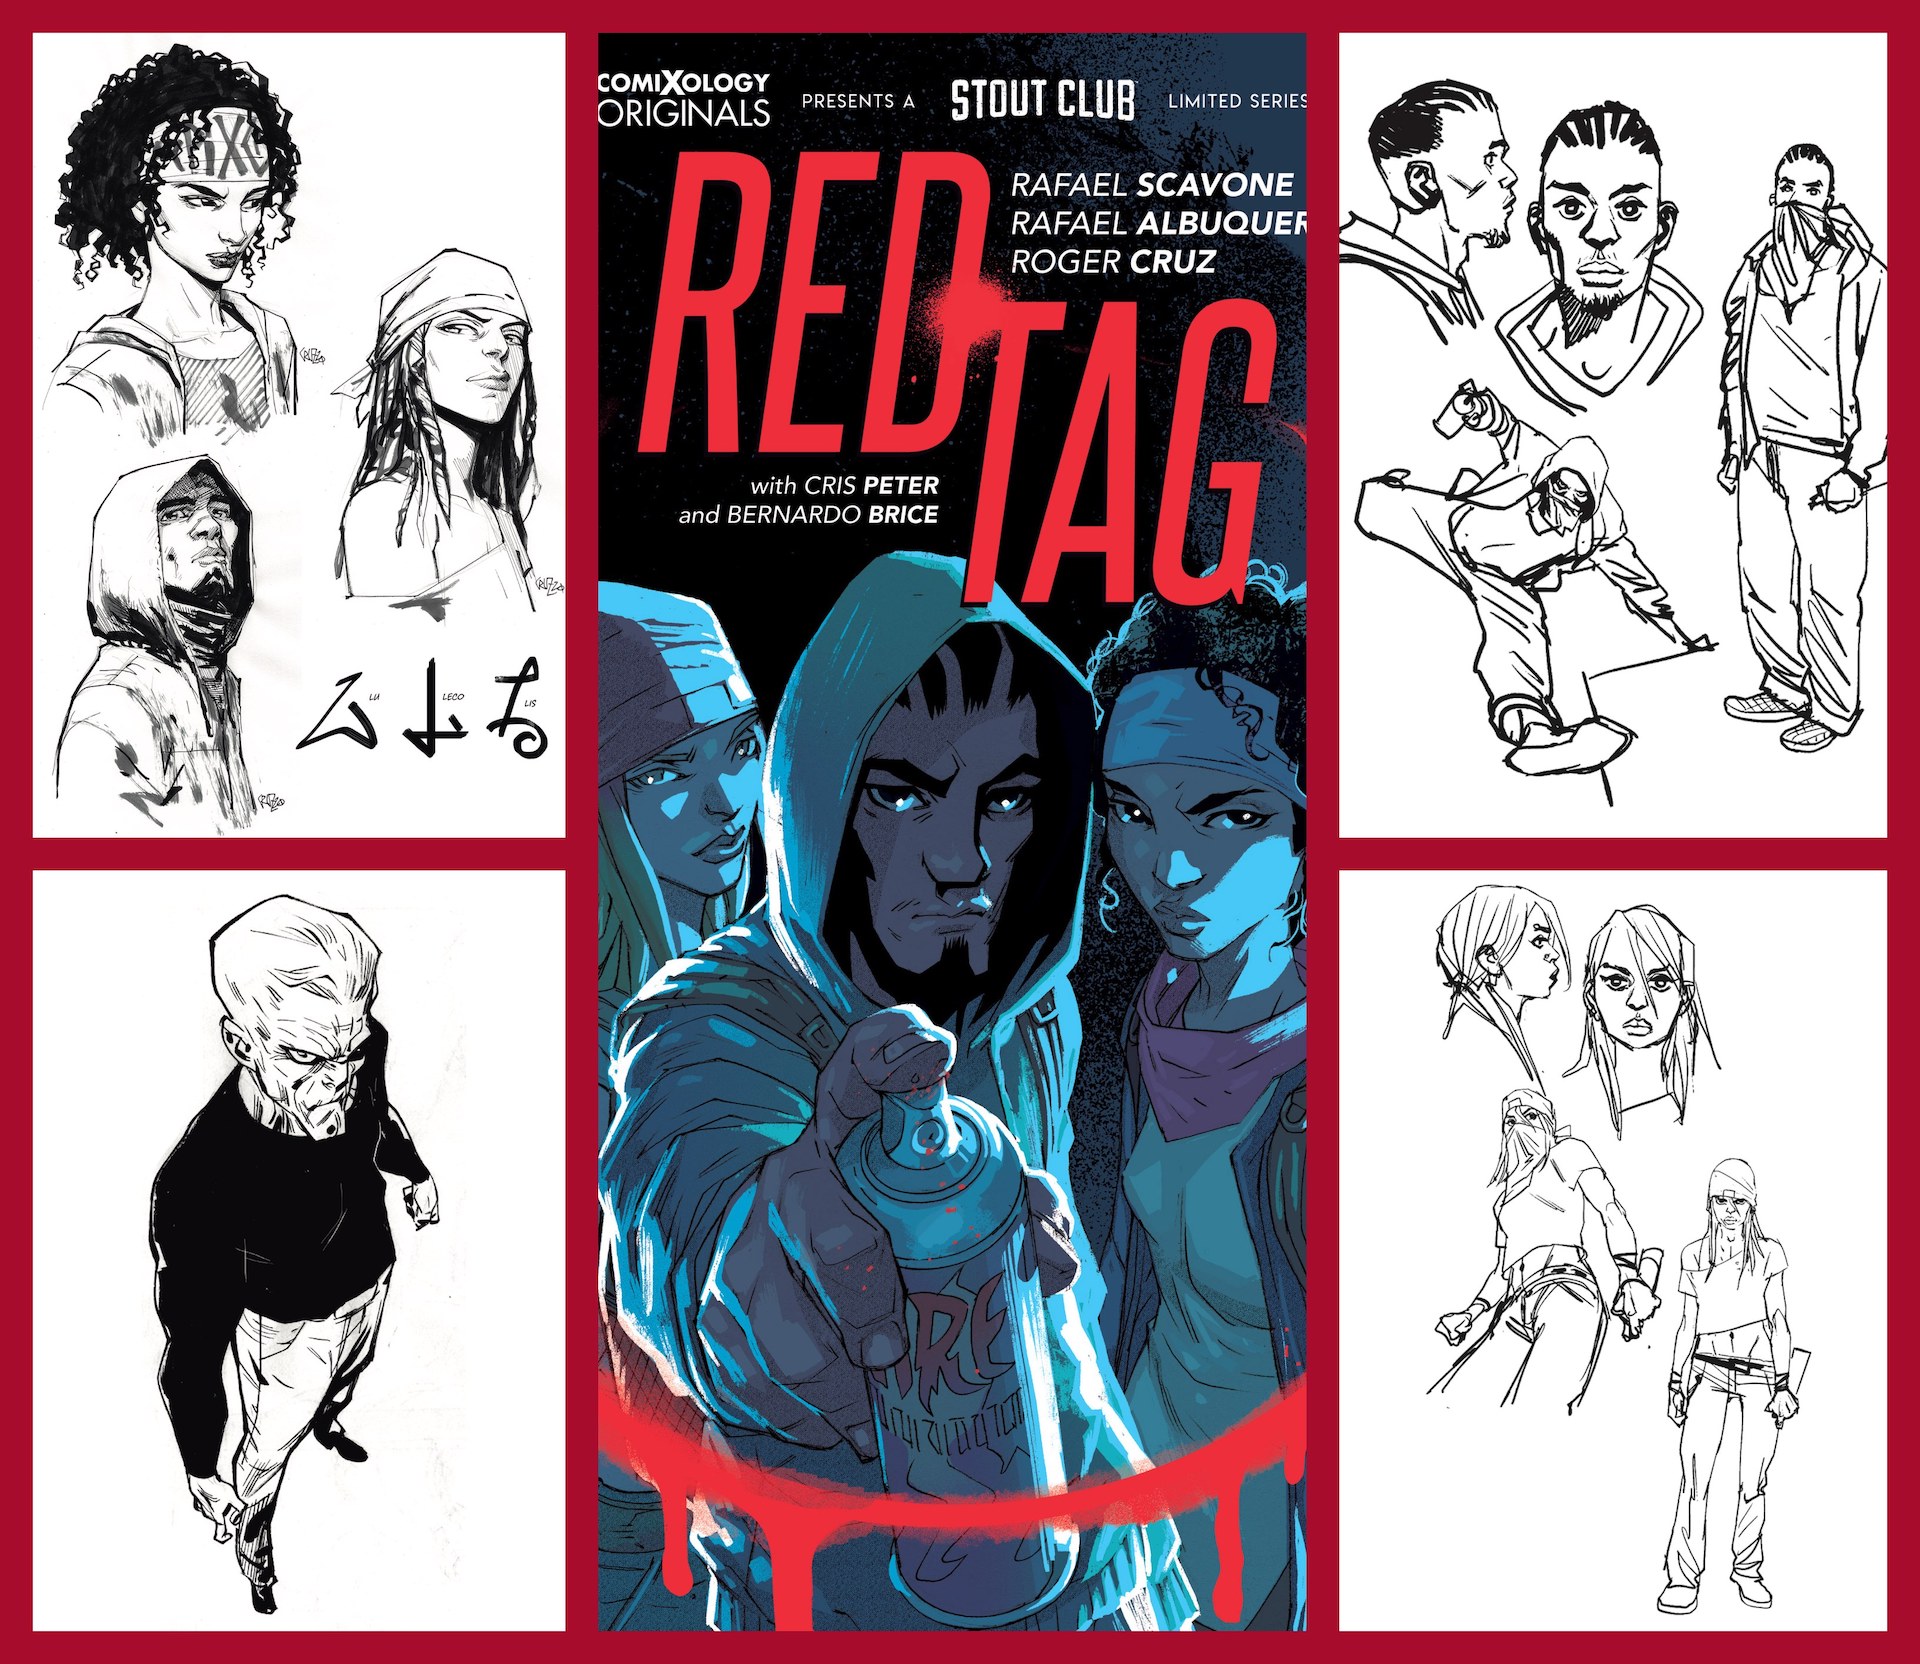 EXCLUSIVE ComiXology First Look: Red Tag - Meet the Cast